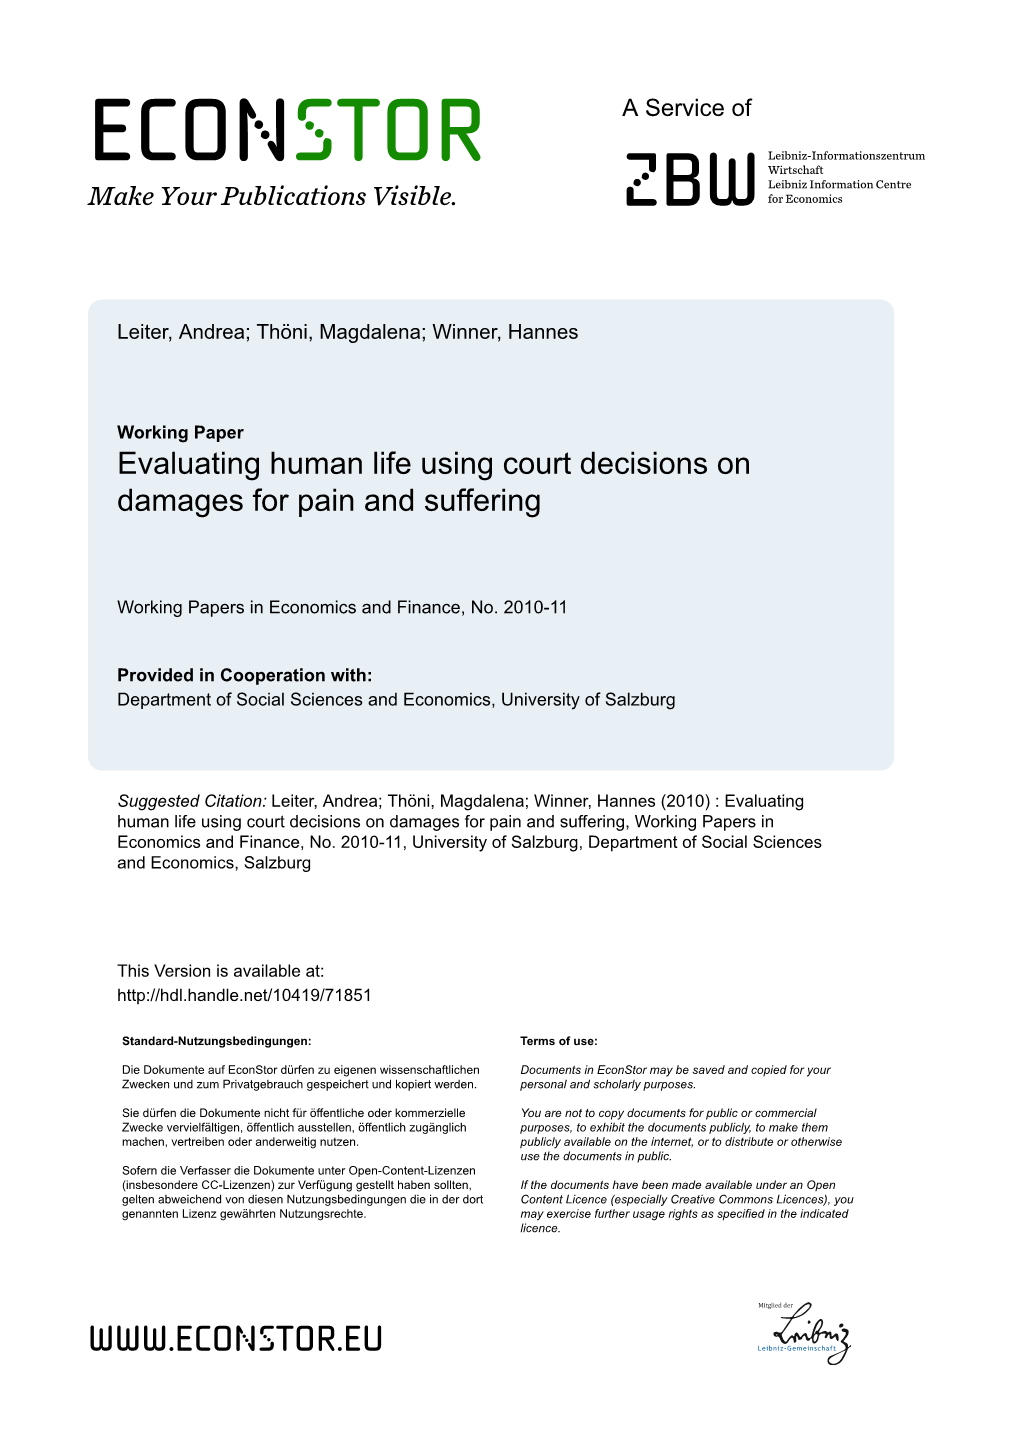 Evaluating Human Life Using Court Decisions on Damages for Pain and Suffering